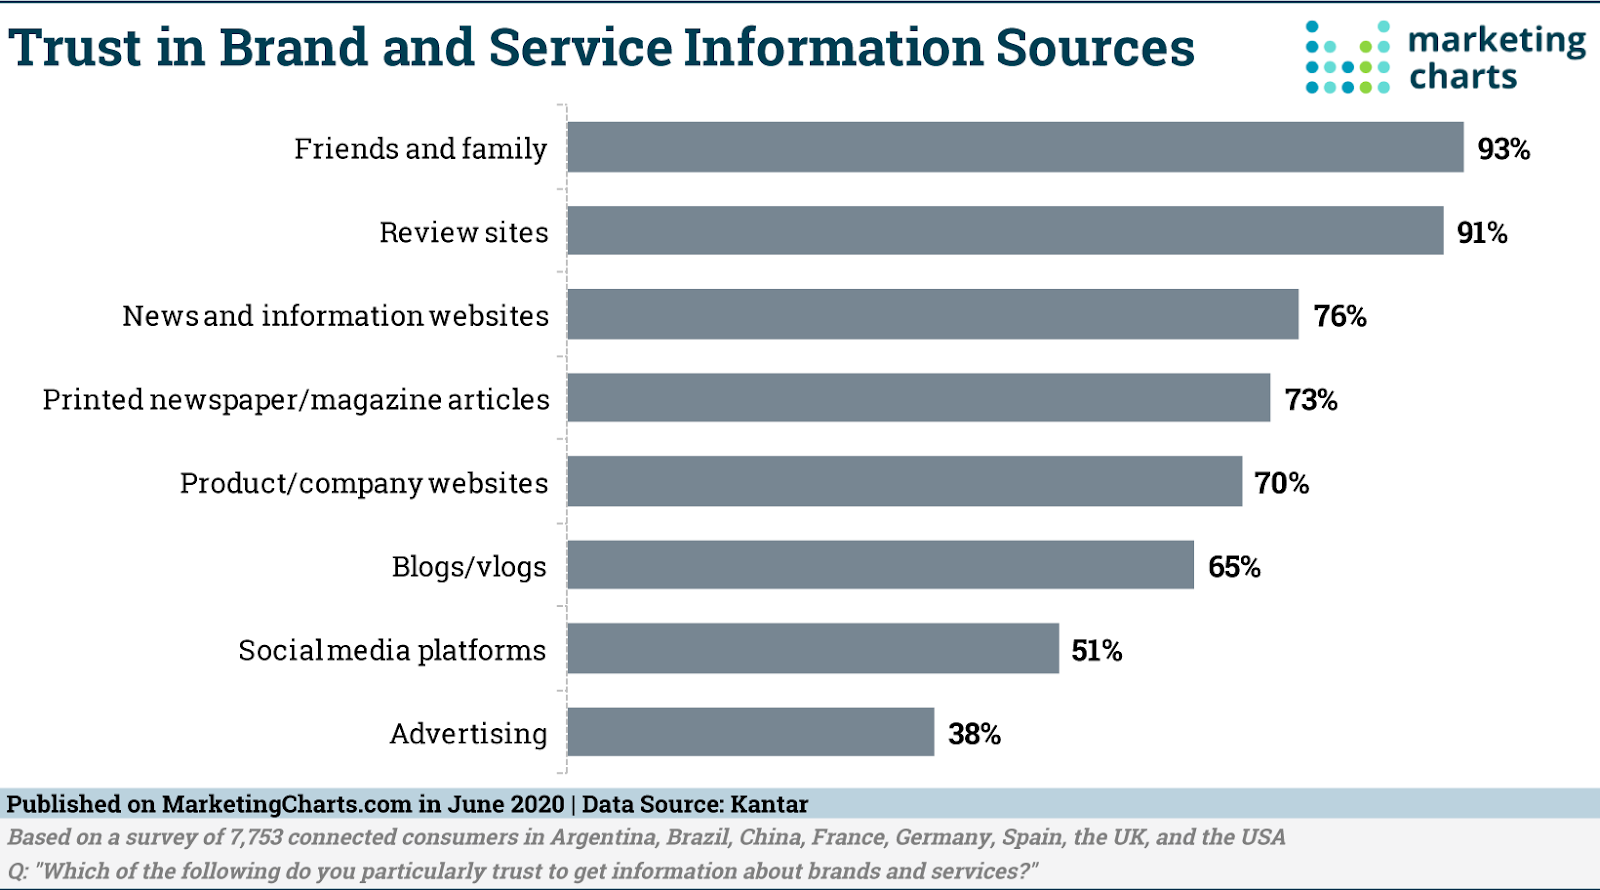 A bar chart that reveals that 93% of consumers trust in friends and family as sources of information